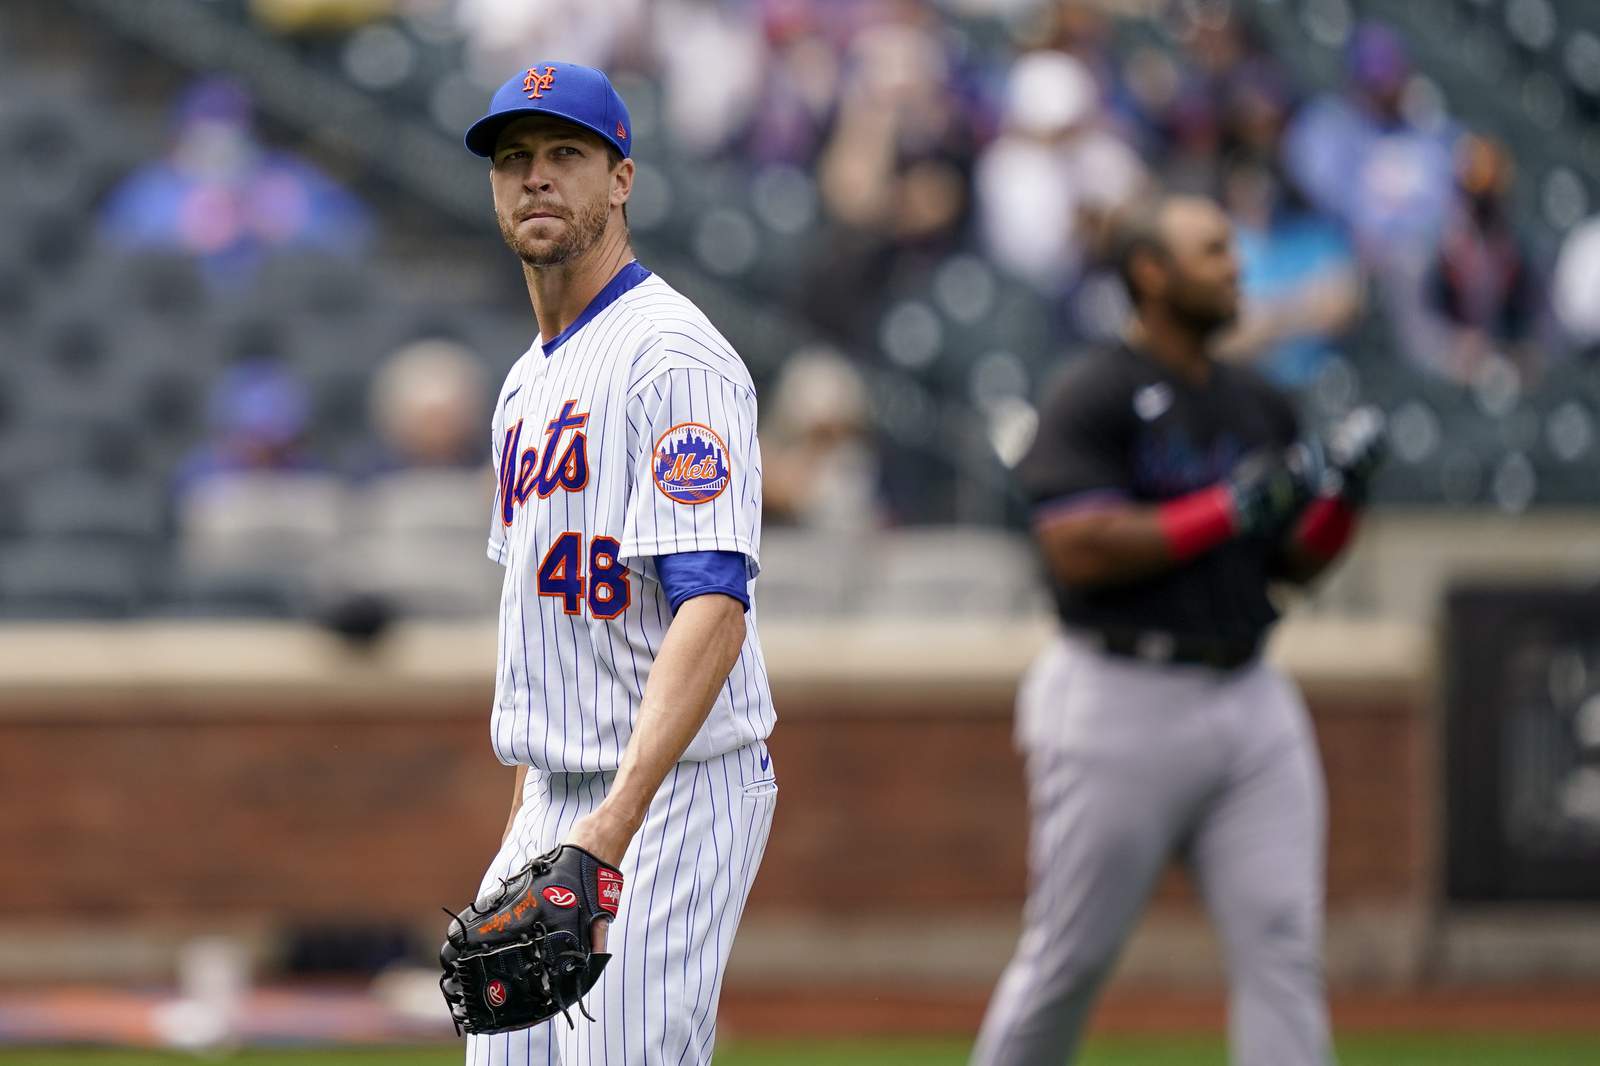 Chisholm homers off deGrom, says heater on 'lighter side'